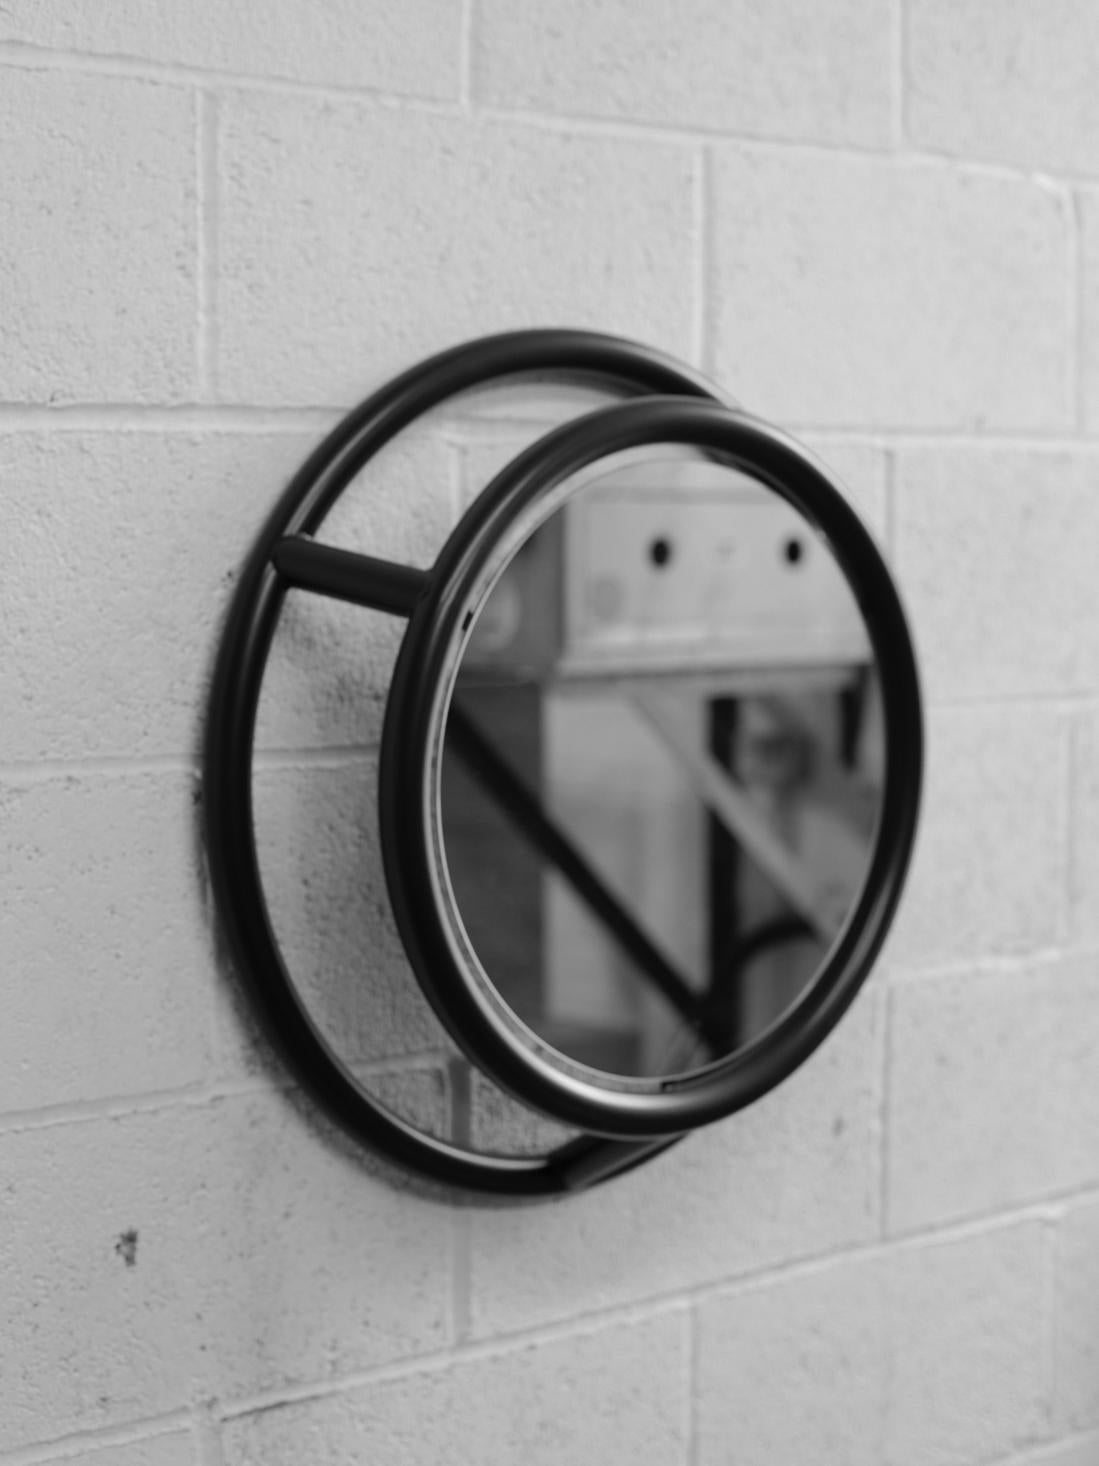 Unique round and round mirror by Kim Thome
Dimensions: D 60 cm
Materials: Steel, float mirror

Kim Thomé is a Norwegian designer based in London.